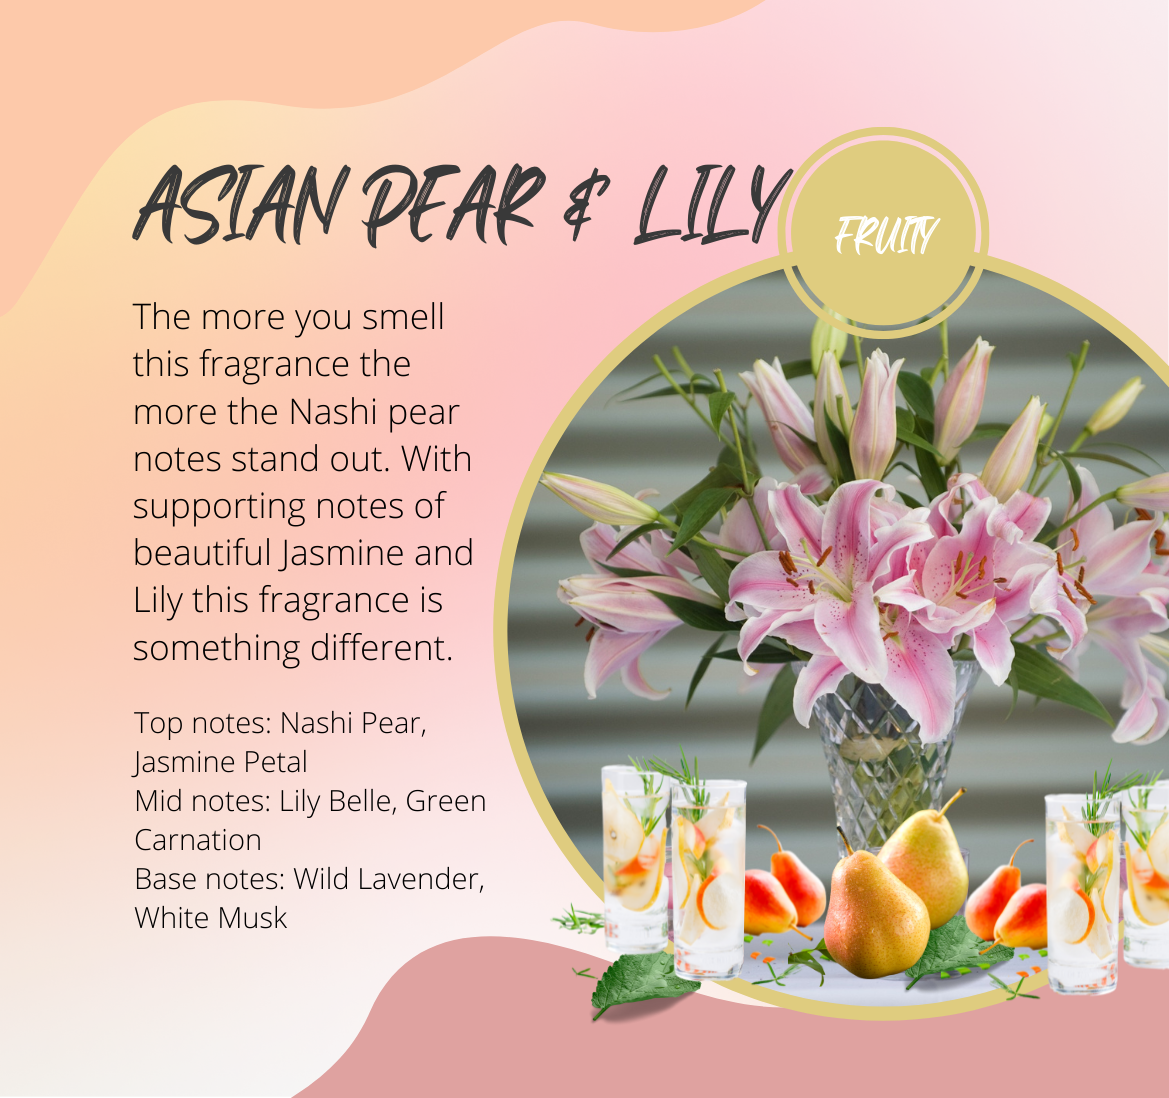 Asian Pear & Lily Fragrance Scent Chart